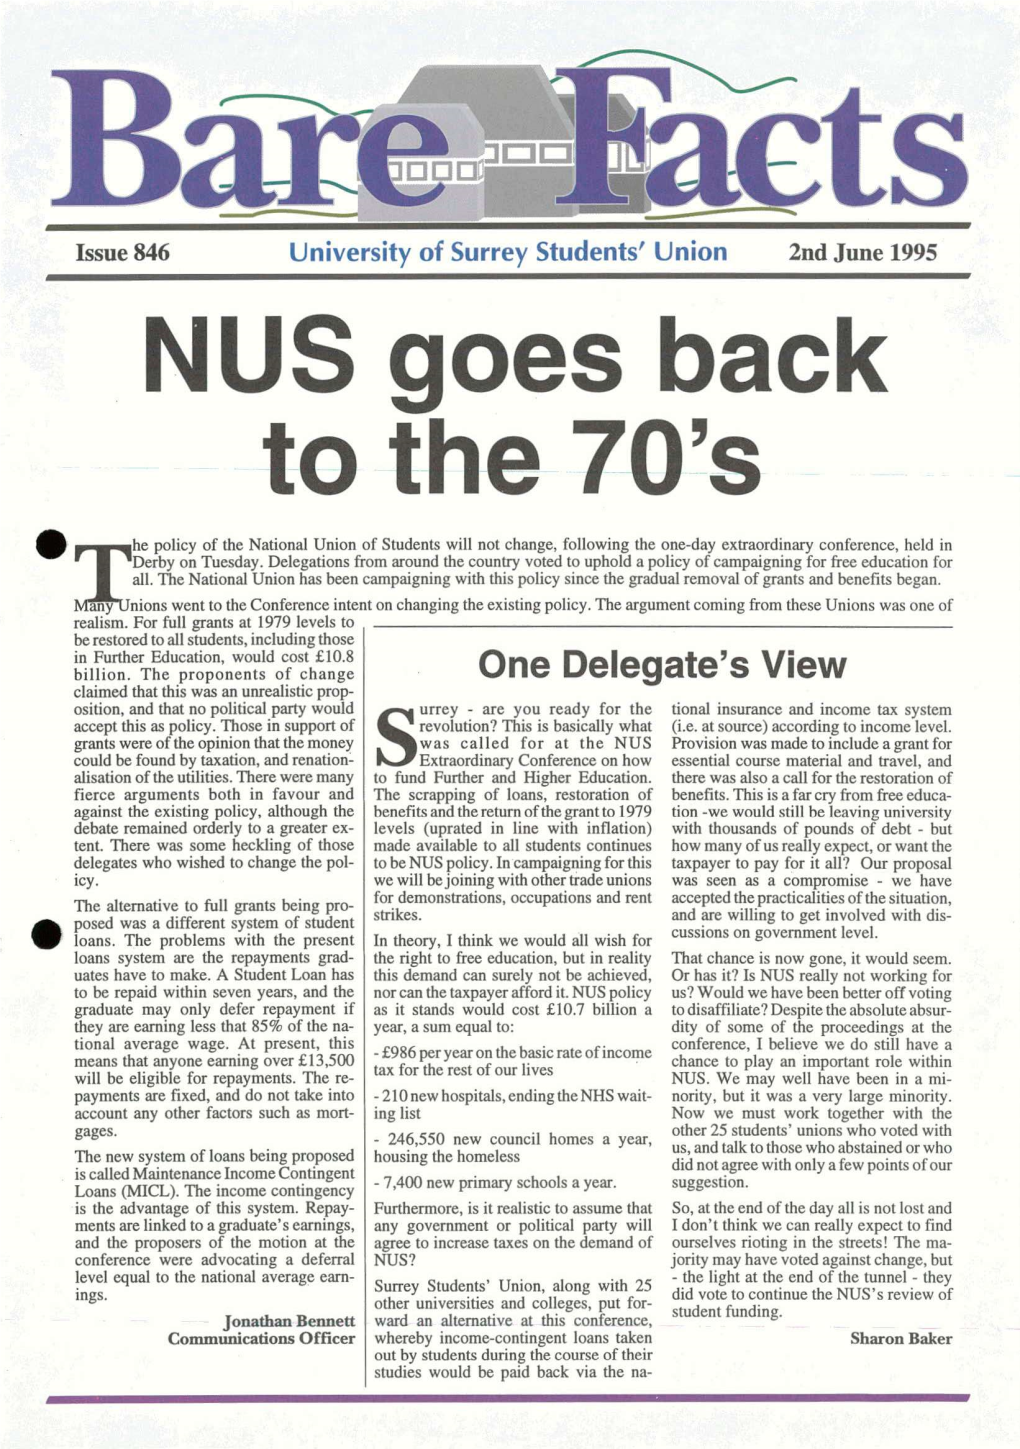 NUS Goes Back to the 70'S